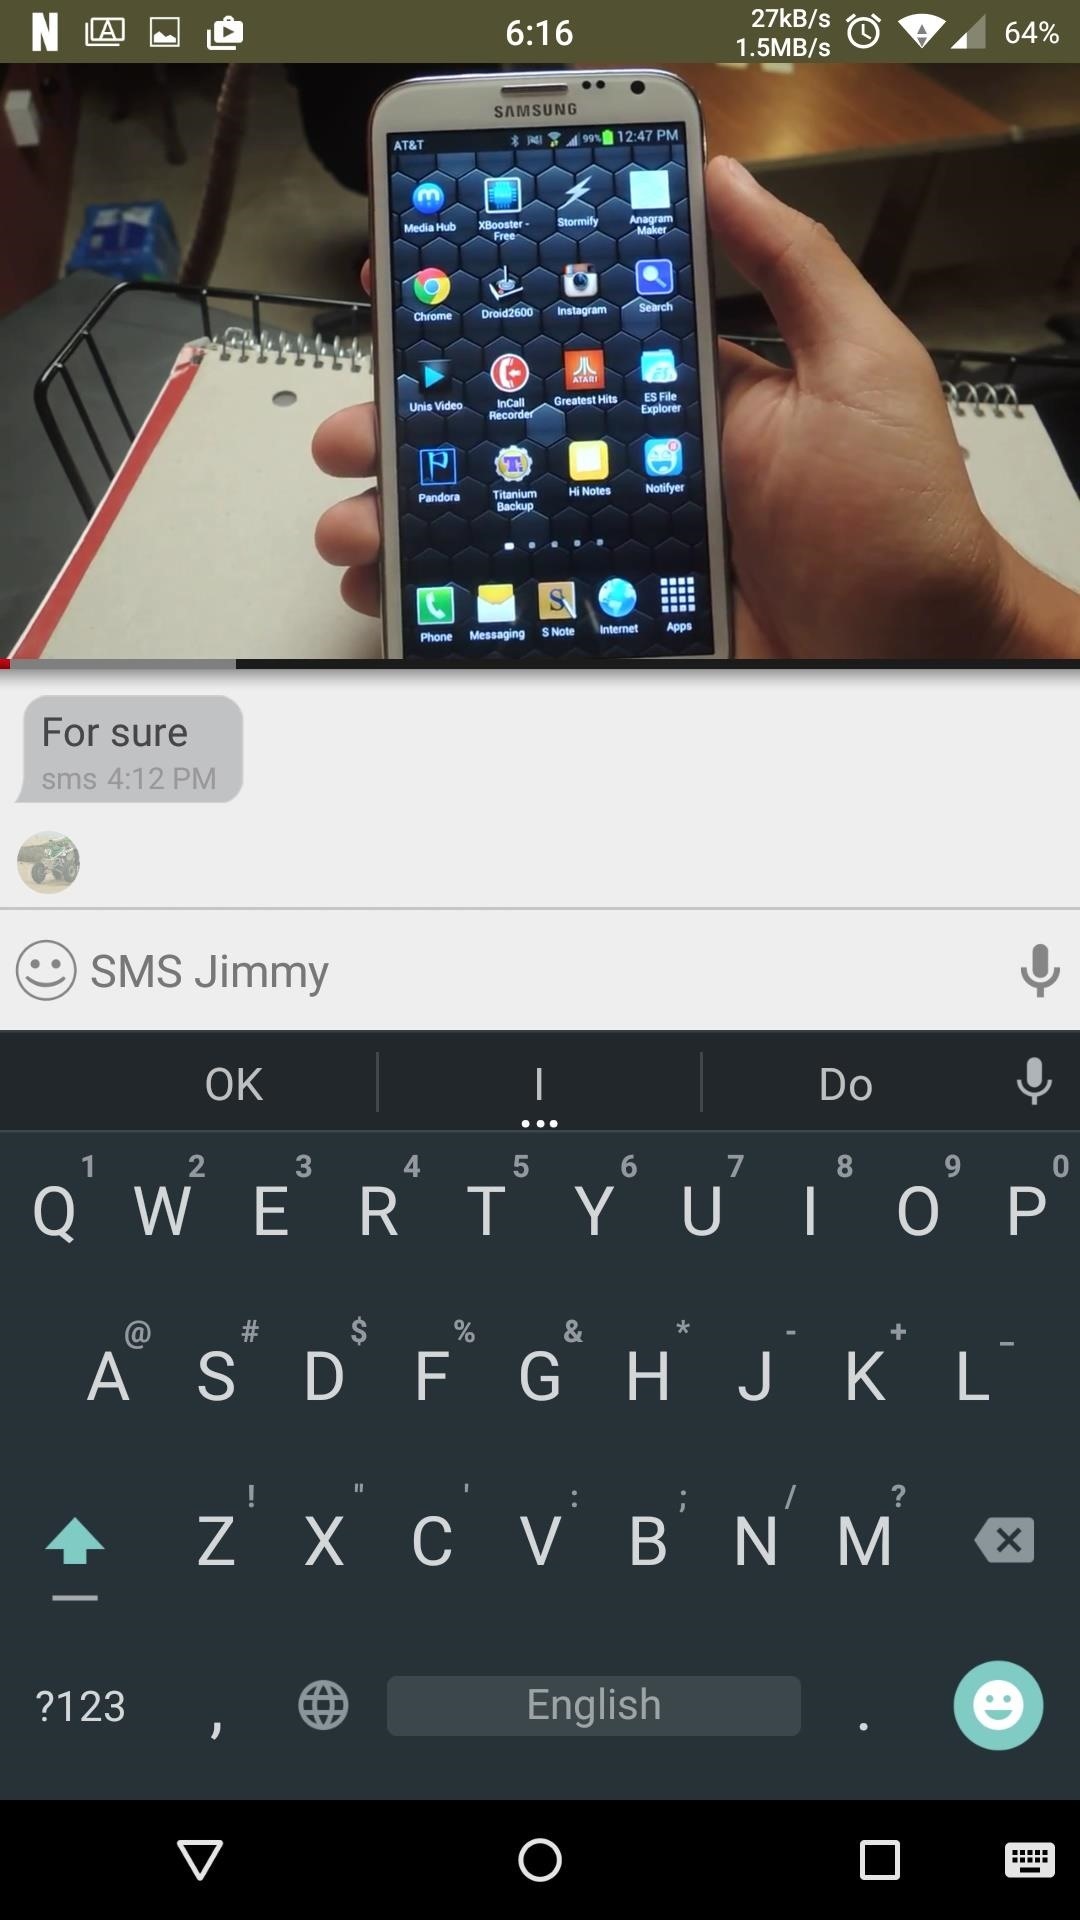 10 Free Texting Apps for Android That Are Way Better Than Your Stock SMS App